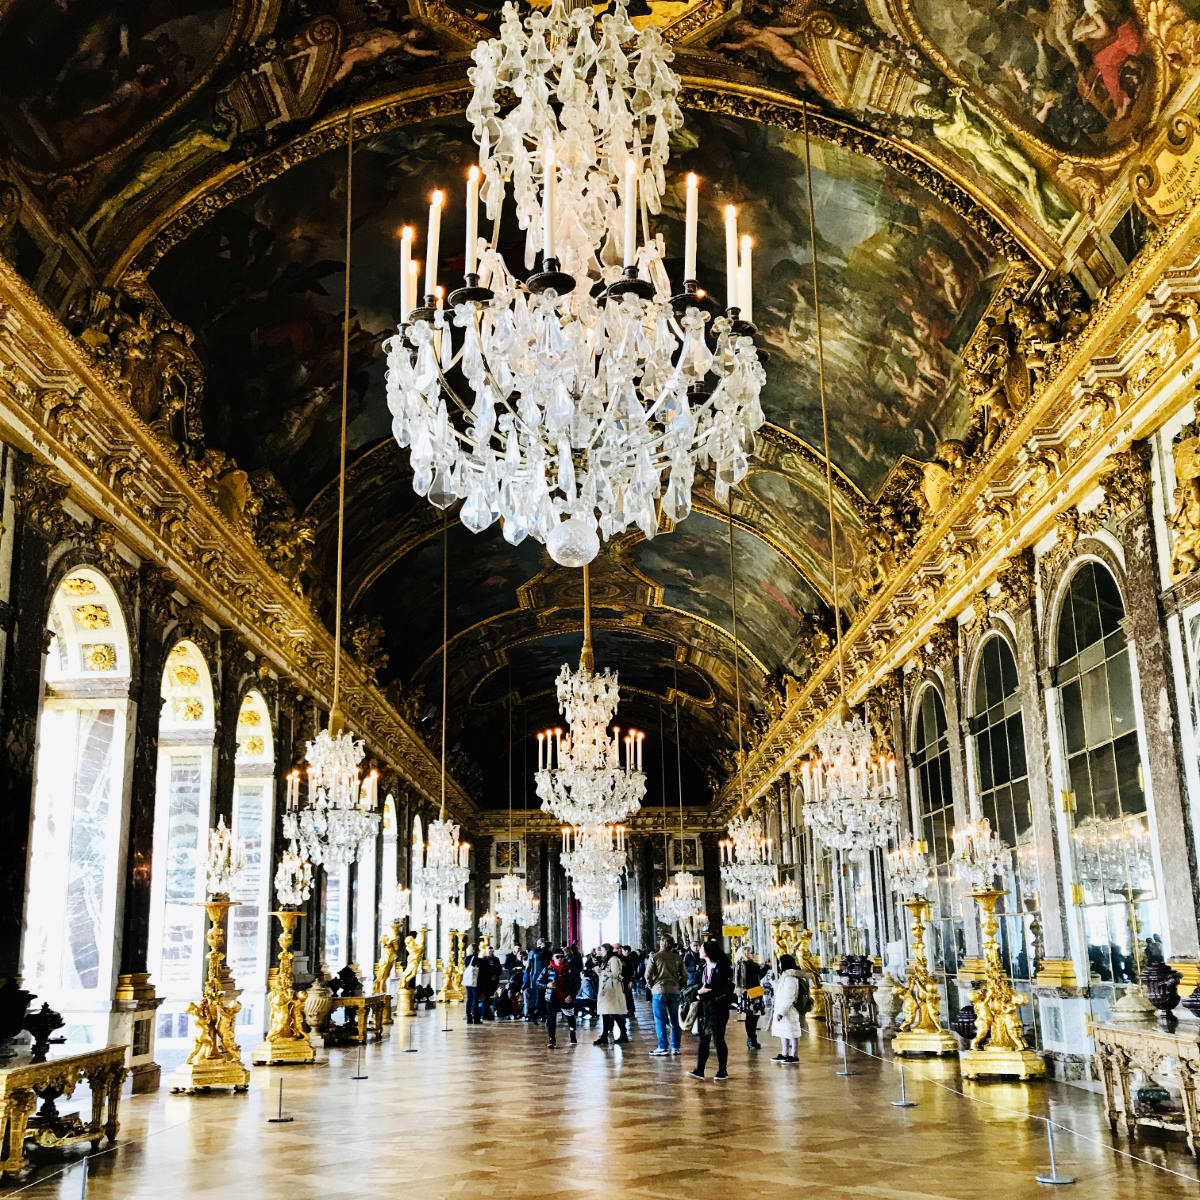 You are currently viewing Hall of Mirrors at Versailles: 16 facts and history